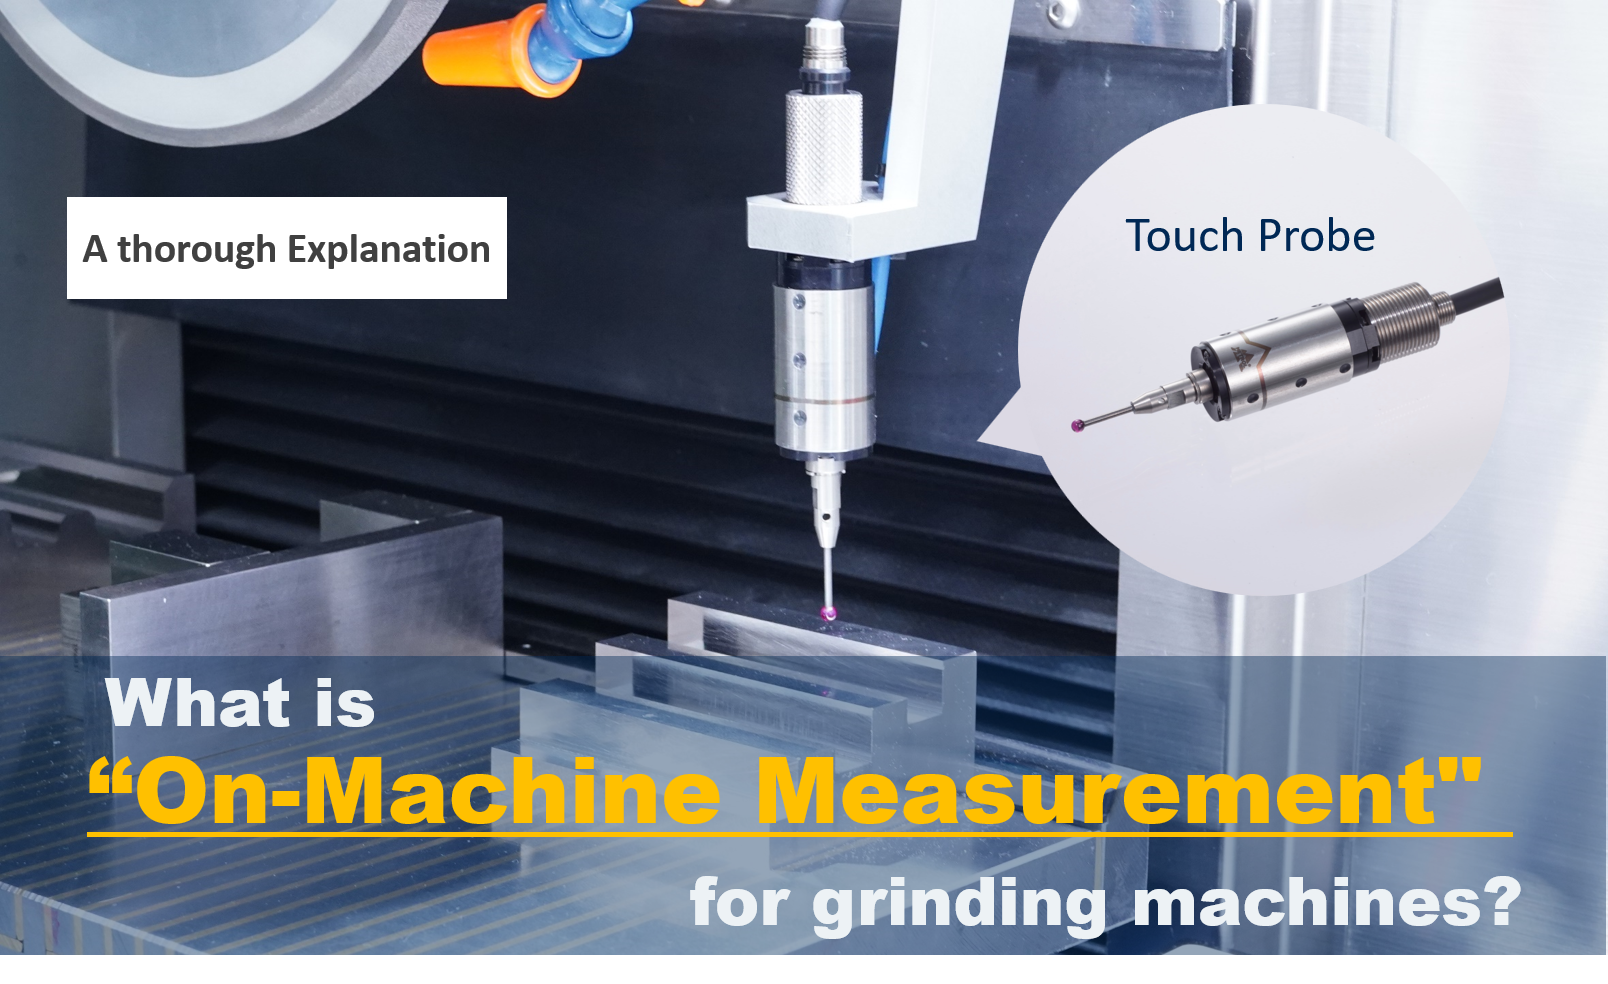 What is "On-machine measurement" for grinding machines using touch probes?